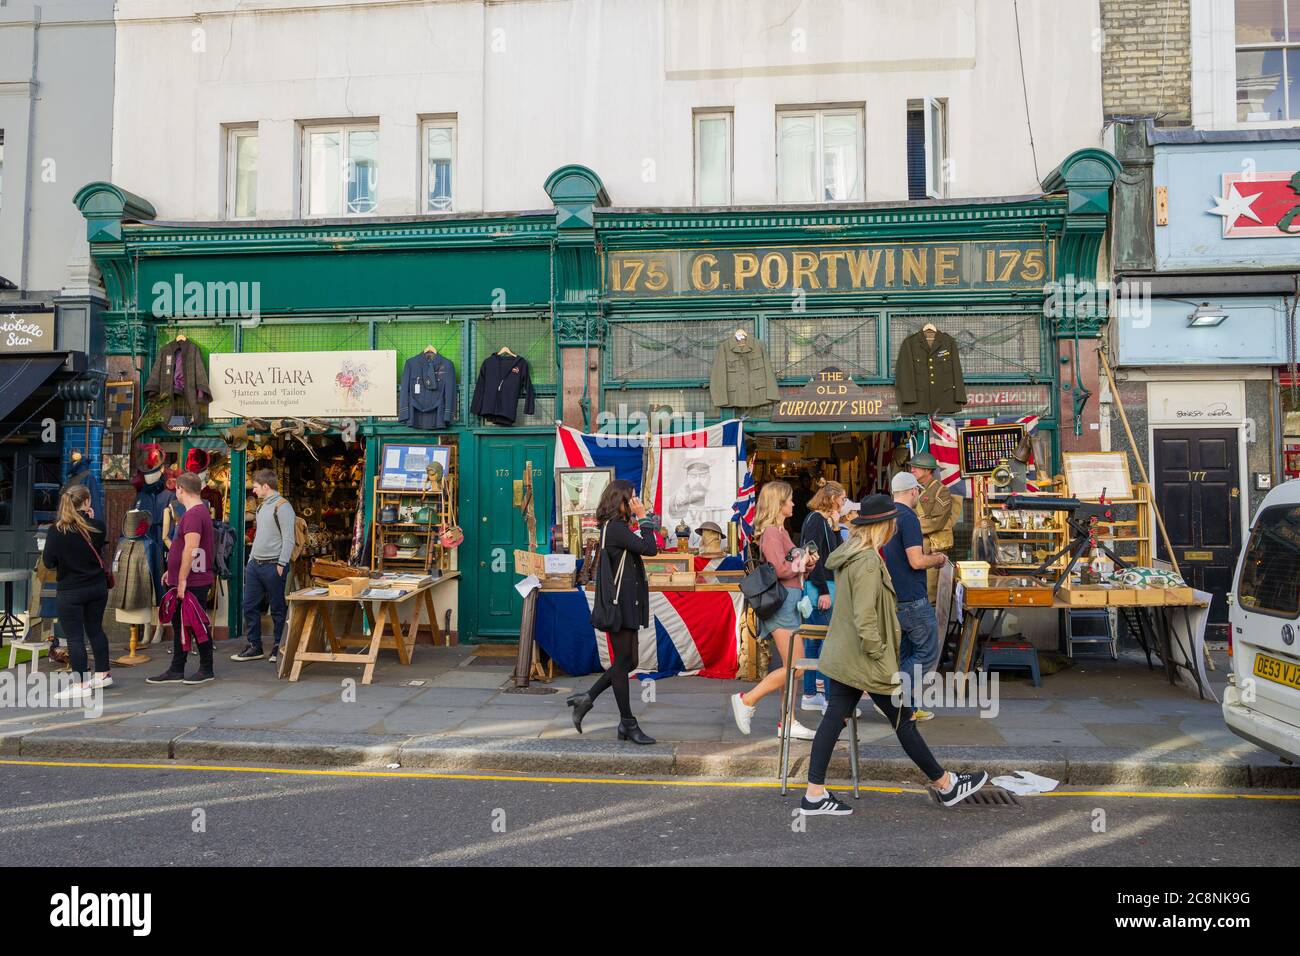 Visitors to Portobello Road, Notting Hill, London, strolling and browsing. British flag and Lord Kitchener poster in the middle of the picture. Stock Photo